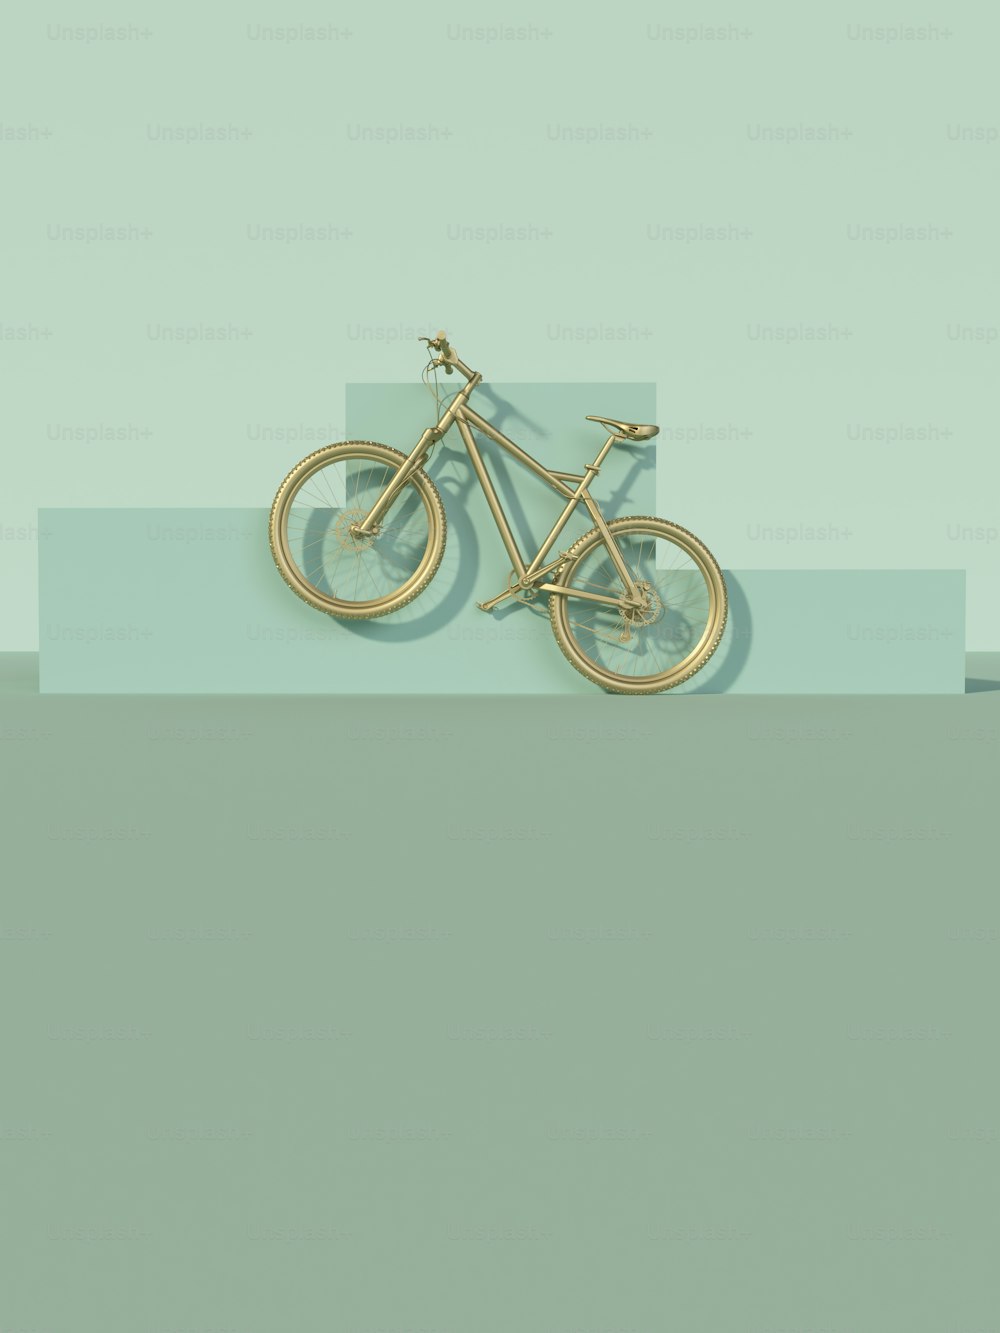 a gold bike is shown on a blue and green background